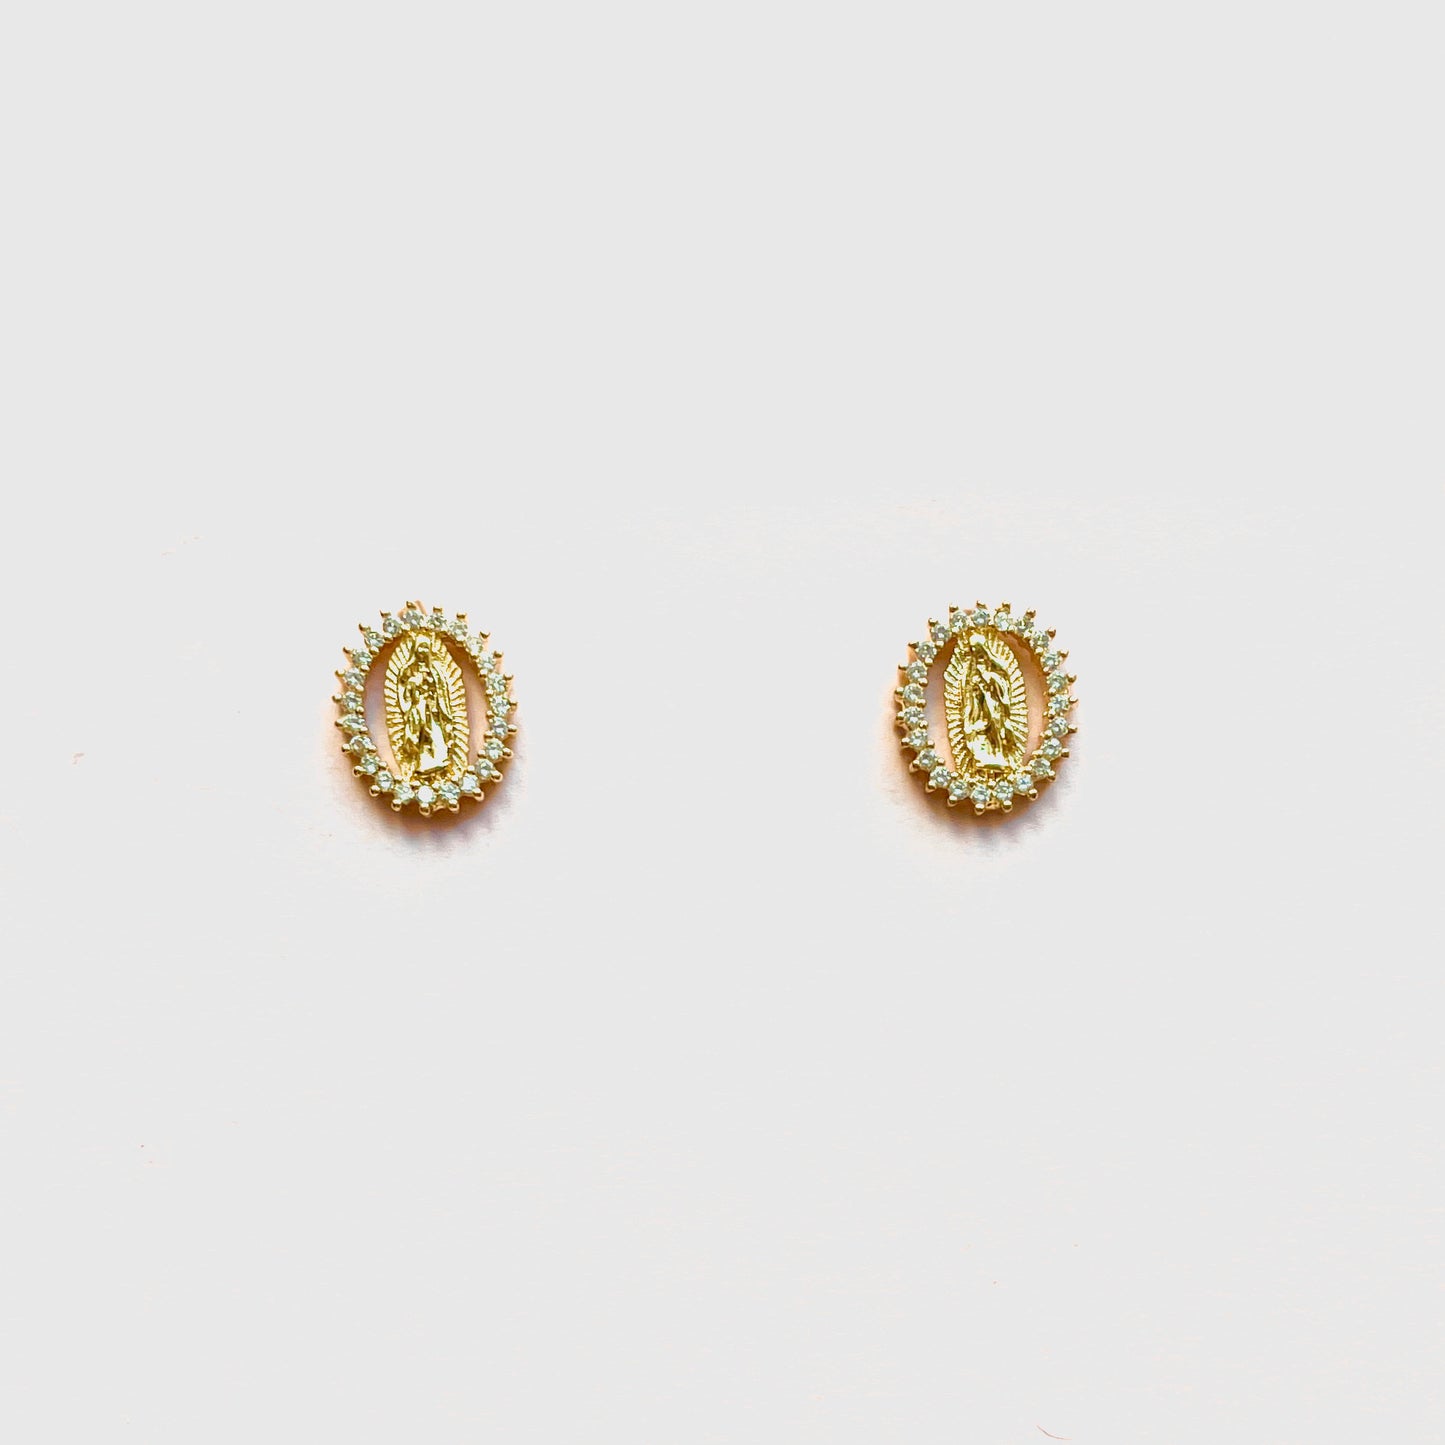 Virgin Lupe Guadalupe Holy Mary Gold Filled Studs Earrings